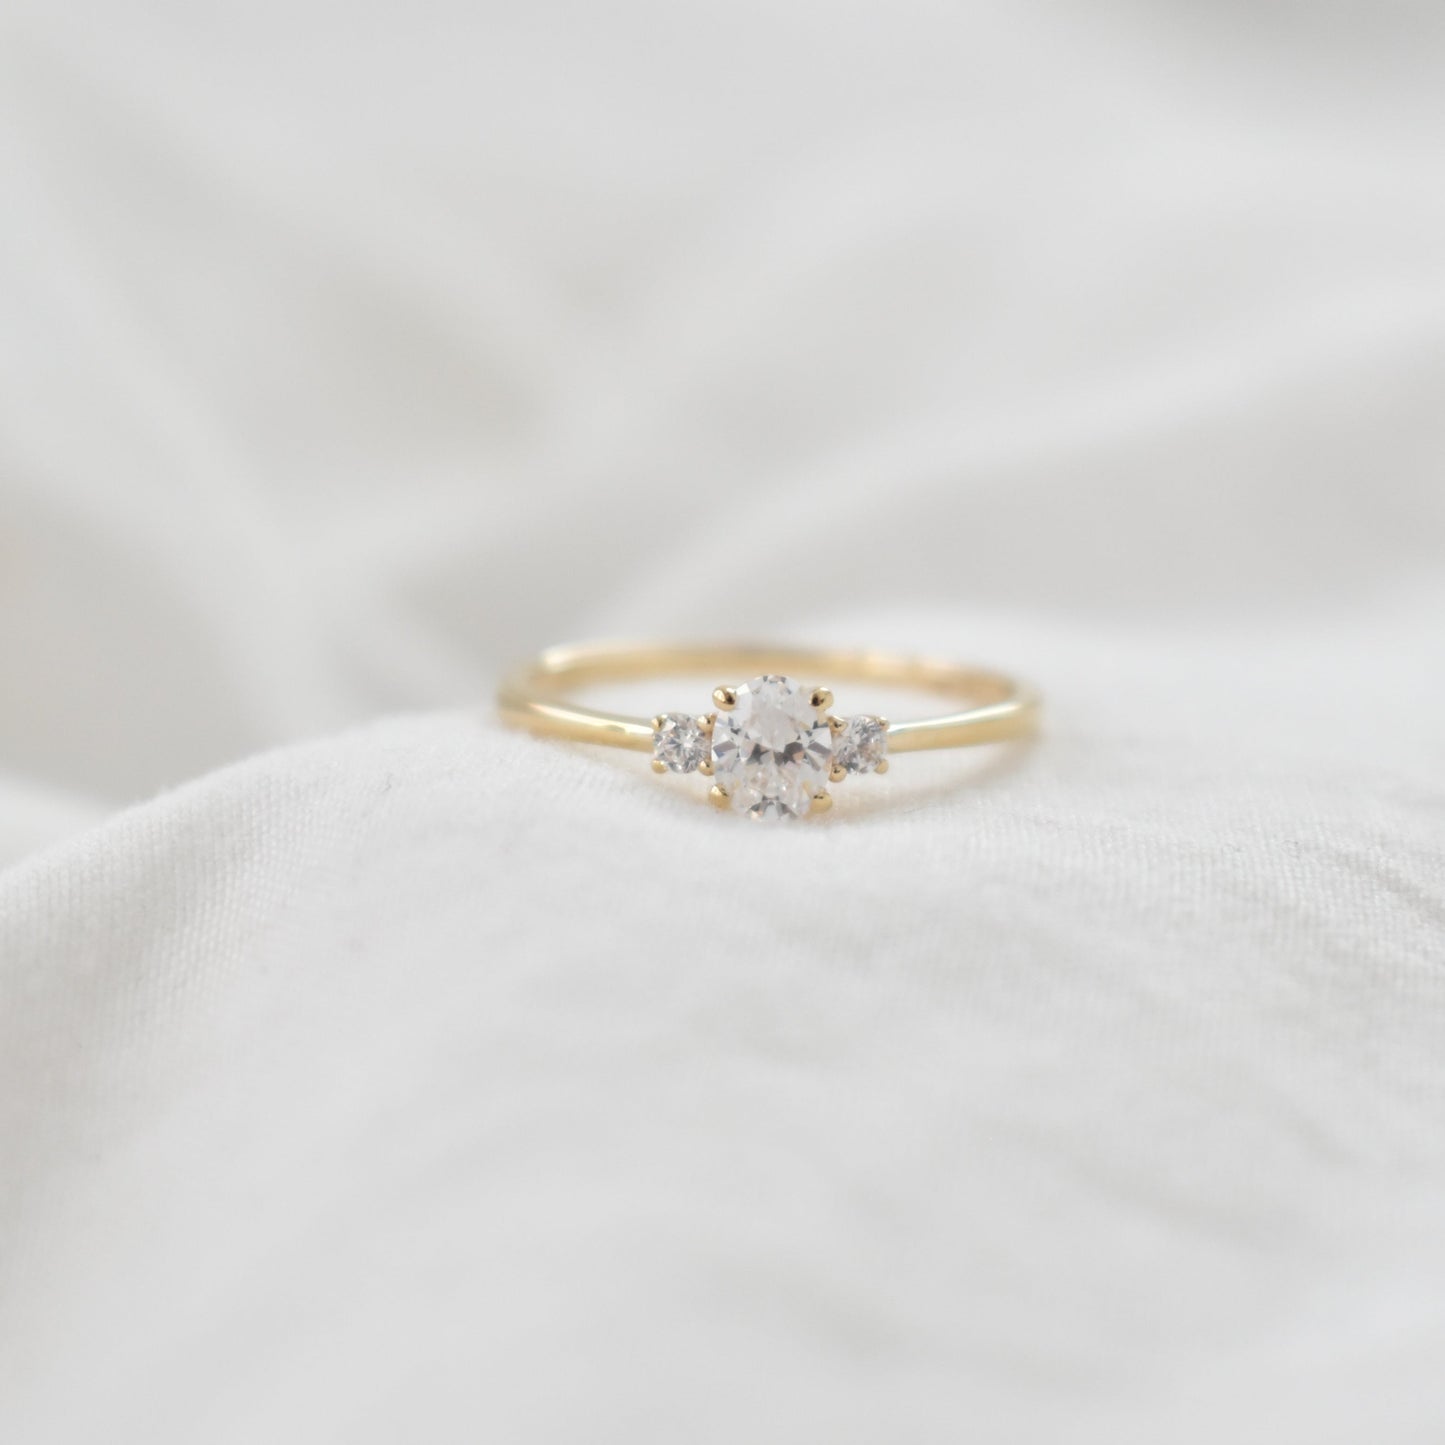 "Phoebe" Ring- CZ Collection